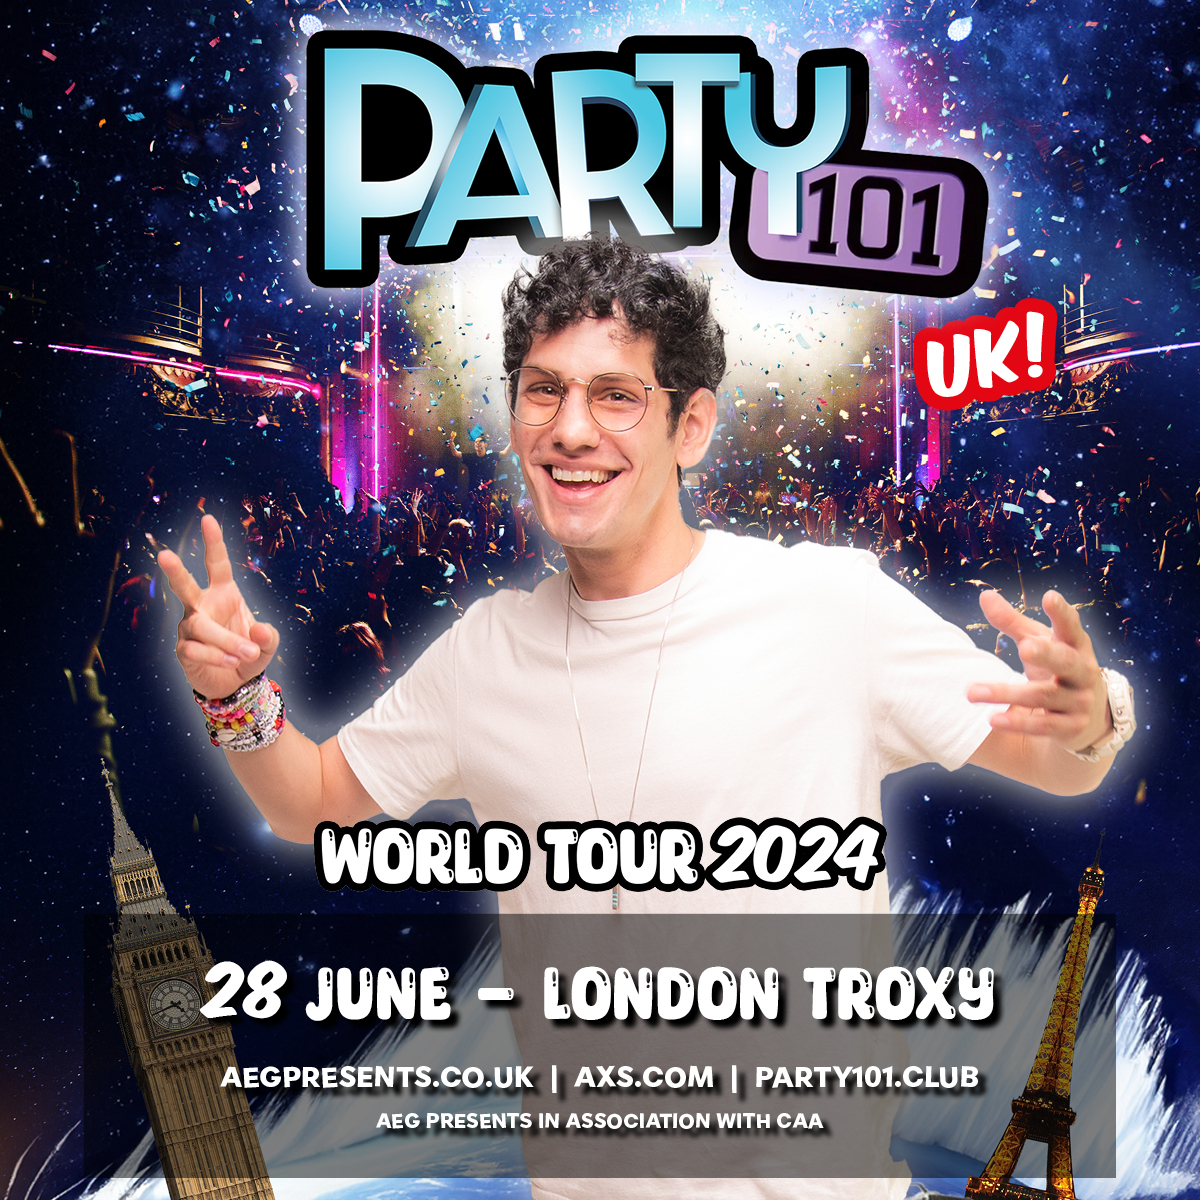 ✨@MattBennett joins us for the biggest party this June with #PARTY101 ✨ Grab tickets link.dice.fm/ia3f6e0d65a7 #mattbennett #londongigs